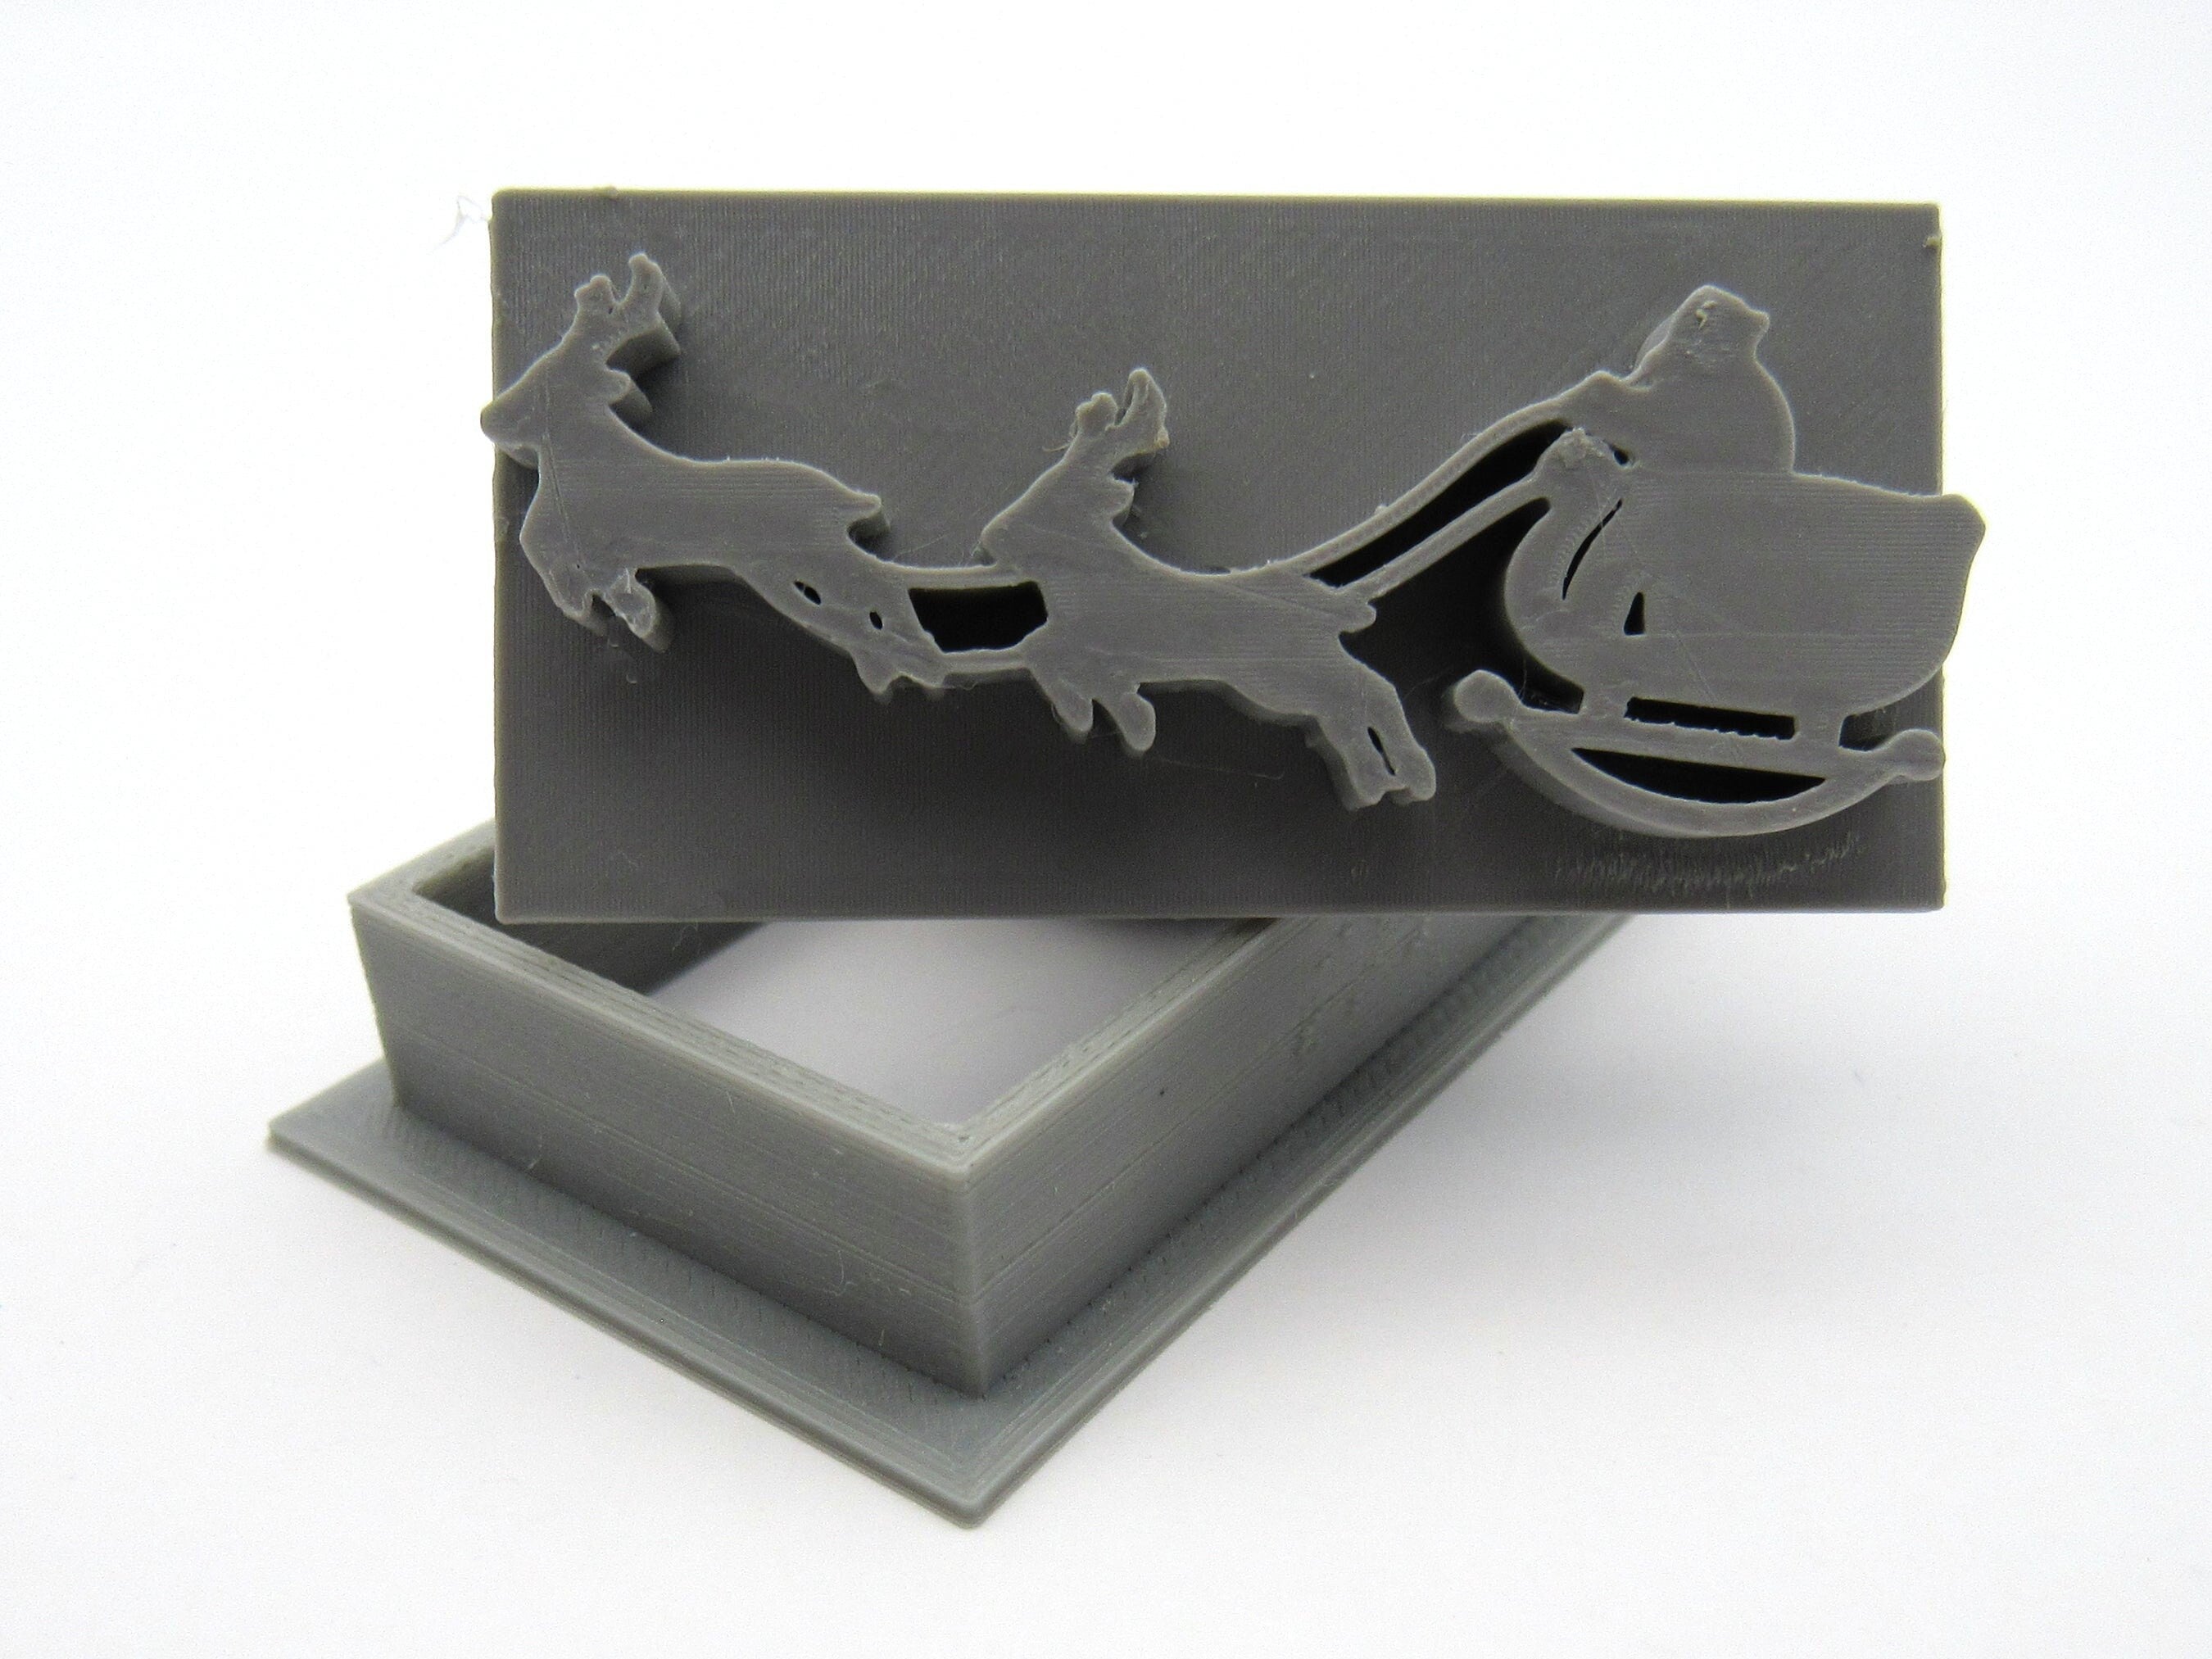 Santa's Sleigh and Reindeer Stamp with Cutter - rectangle pendant clay stamp with cutter Holiday Stamp - A Mayes Pottery